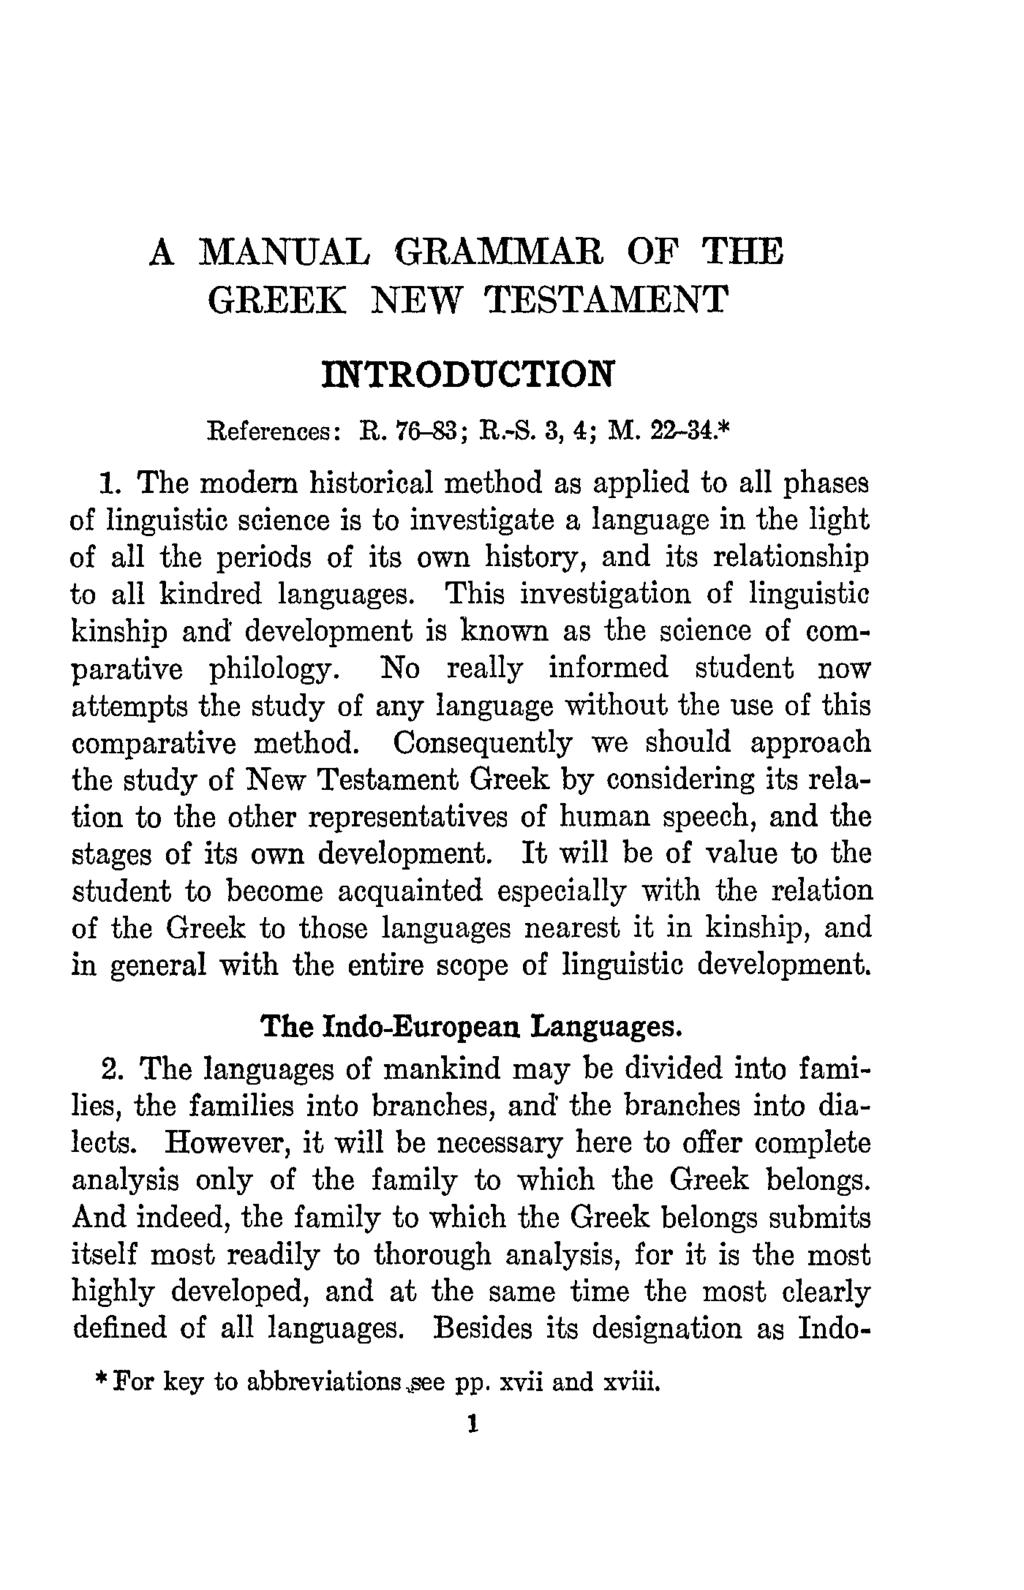 A MANUAL GRAMMAR OF THE GREEK NEW TESTAMENT INTRODUCTION References: R. 76-83; R.-S. 3, 4; M. 2-34* 1.